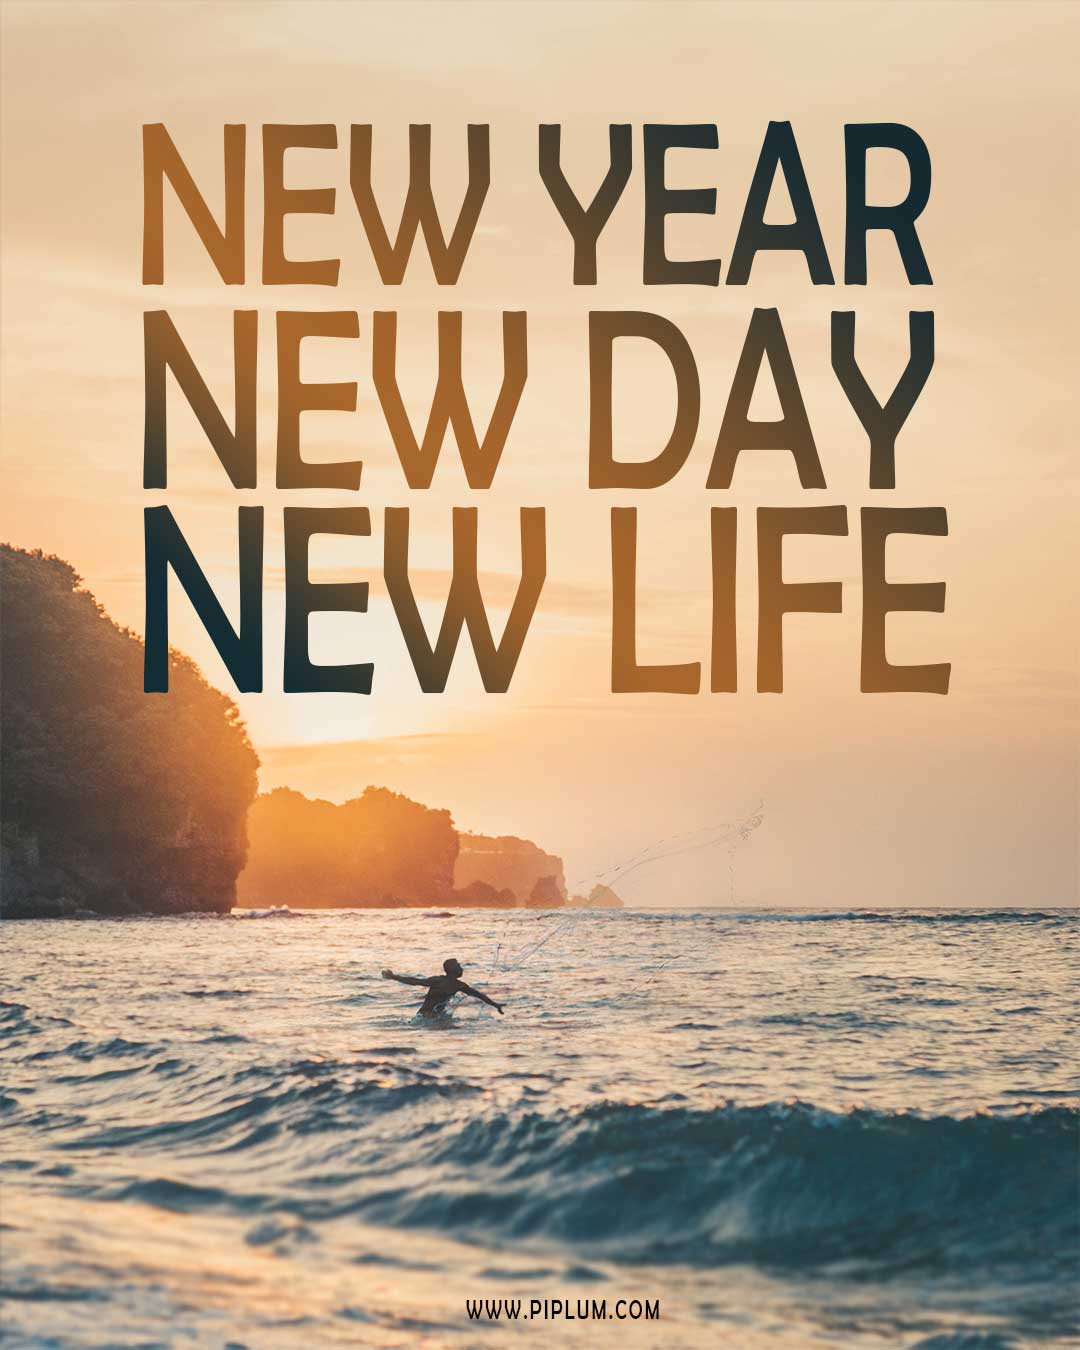 New Year New Day New Life. Inspirational Quote For 2021. 